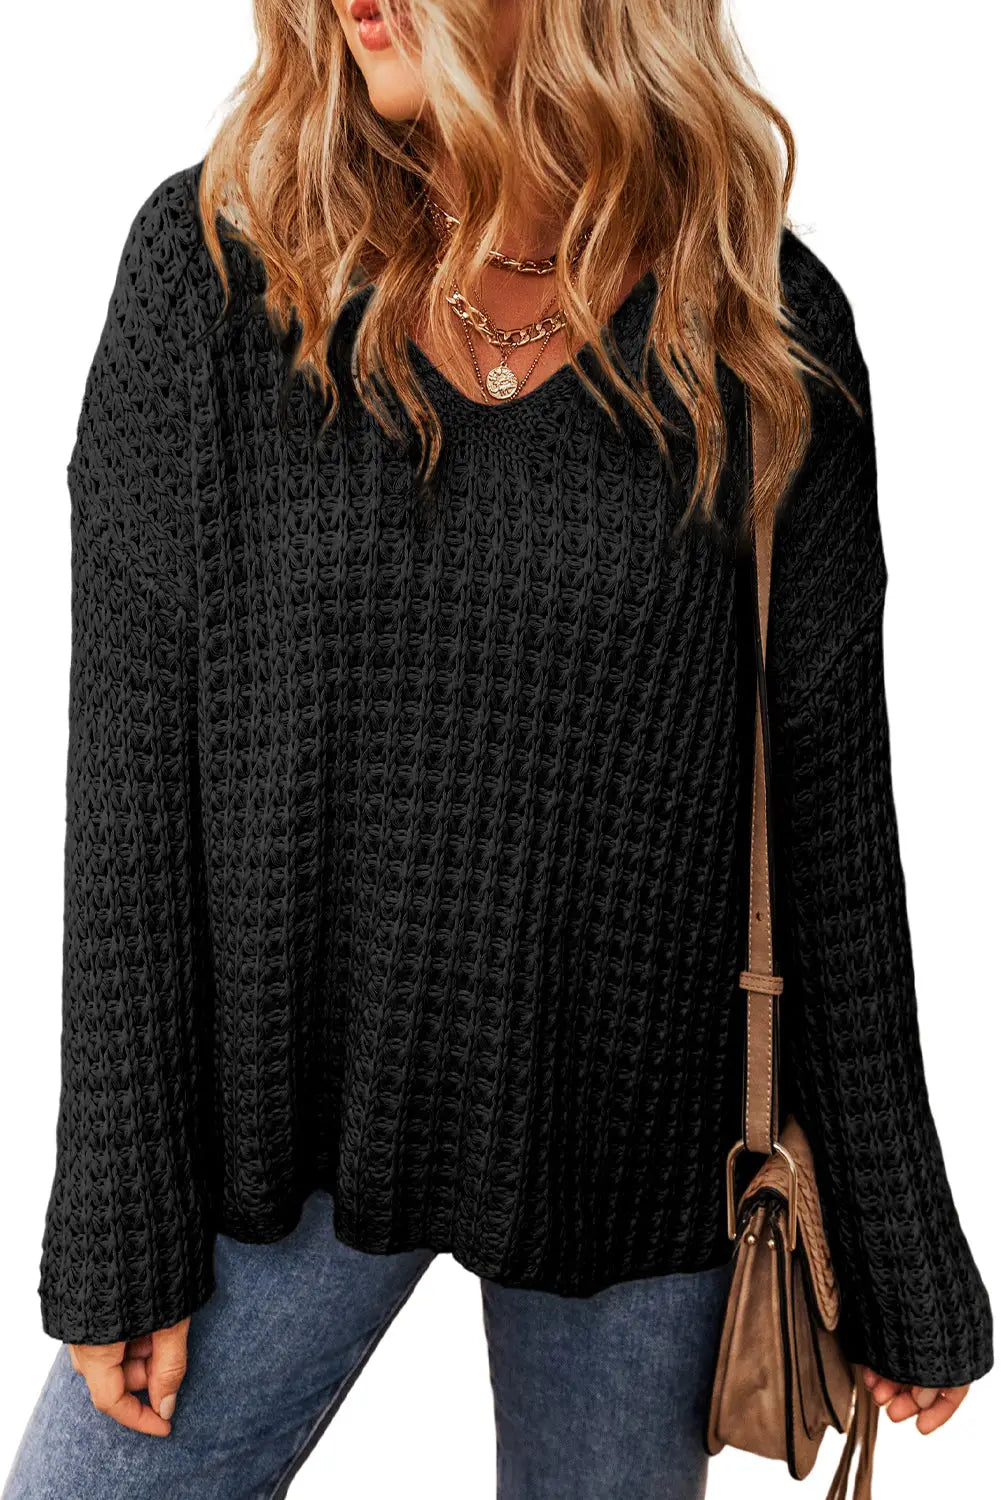 Black hollow-out crochet v neck sweater - tops